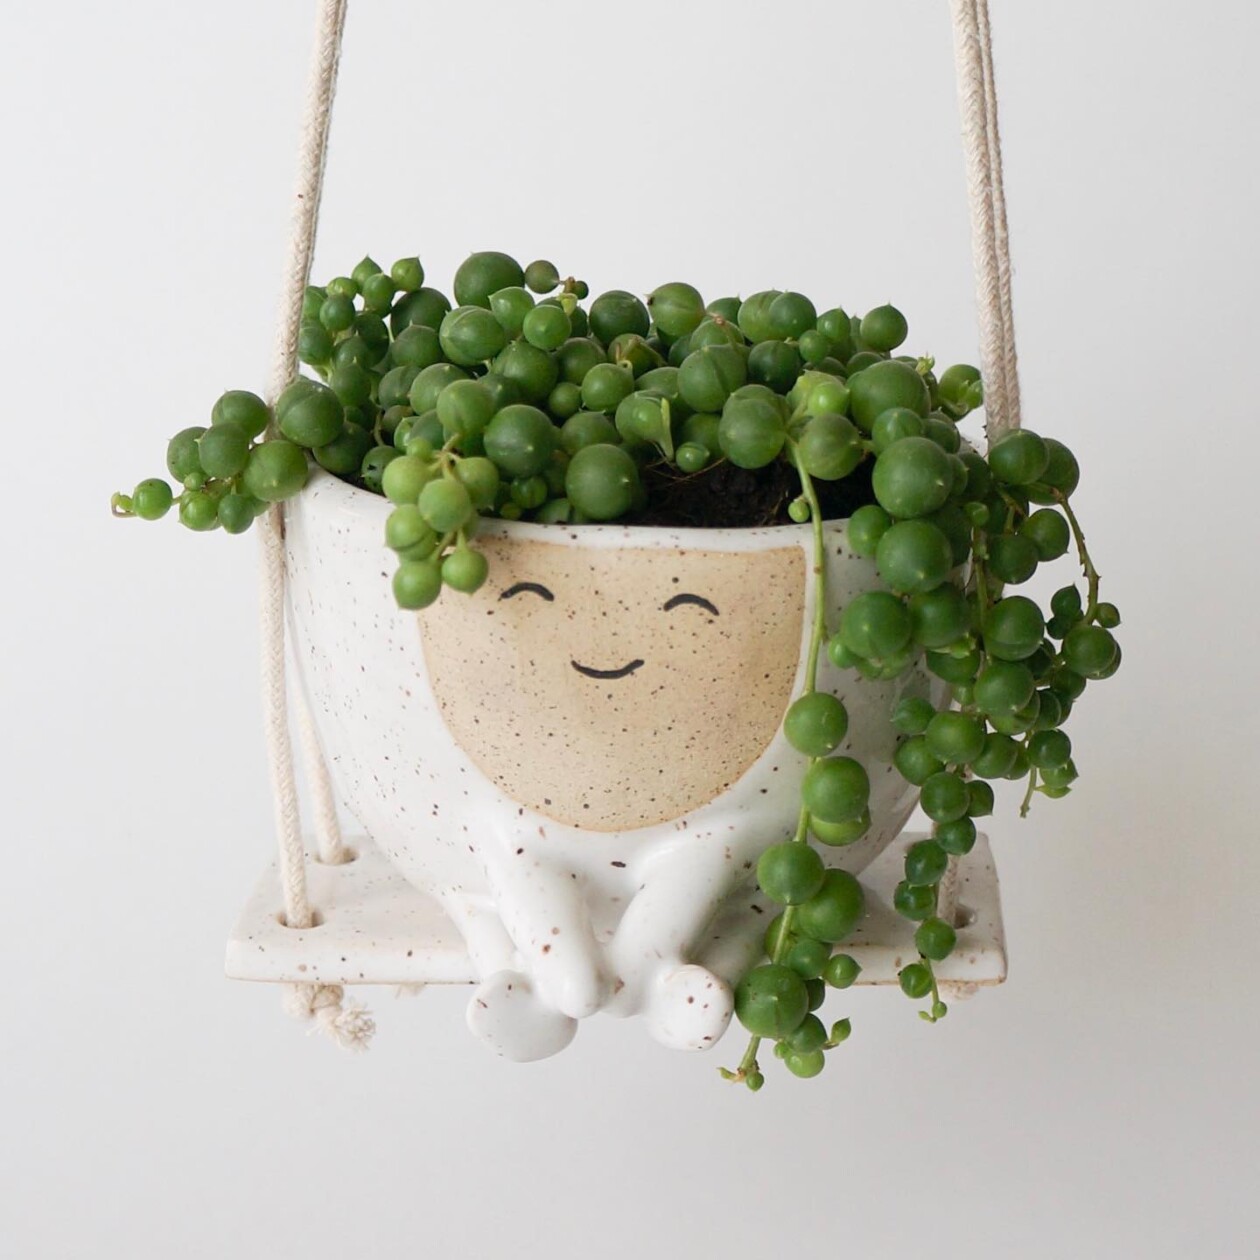 Amusing And Adorable Anthropomorphic Planters By Abby Ozaltug (4)